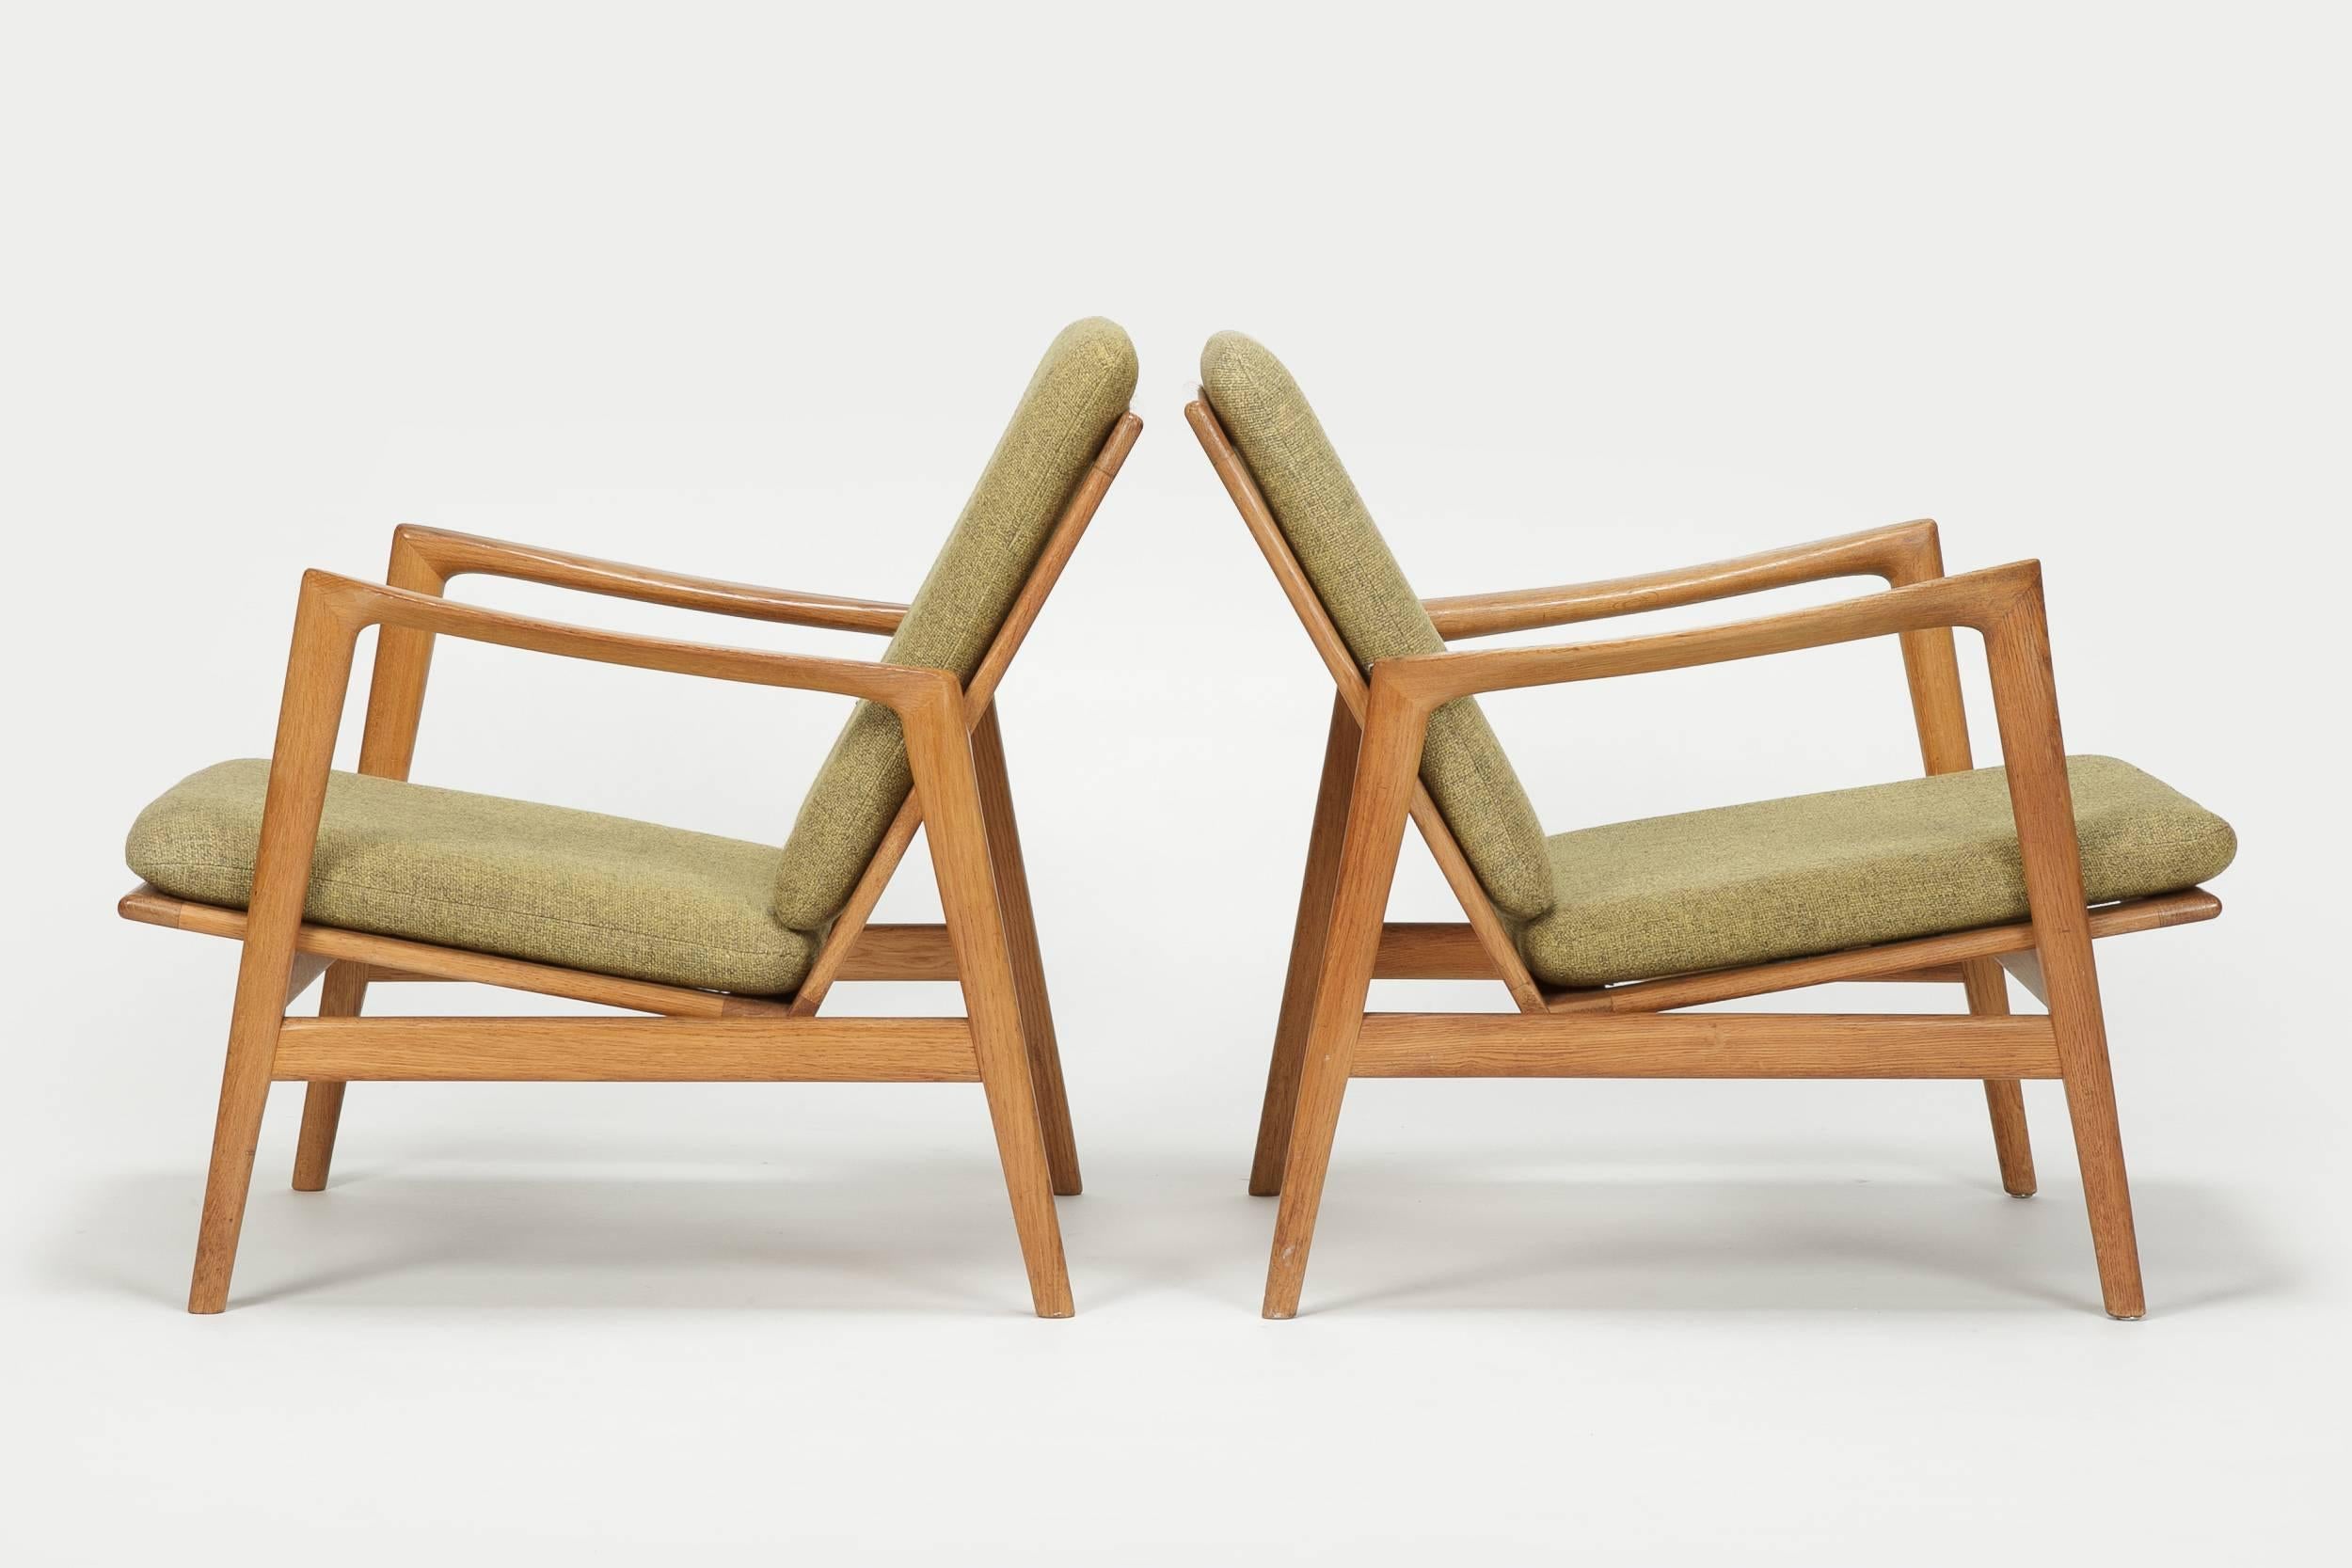 Beautiful pair of Hans Olsen lounge chairs manufactured in the late 1950s by Juul Kristiansen in Denmark. Very elegant shape of frame with beautiful crafted details, made of solid oak with the original upholstery in a light green mixed wool fabric.